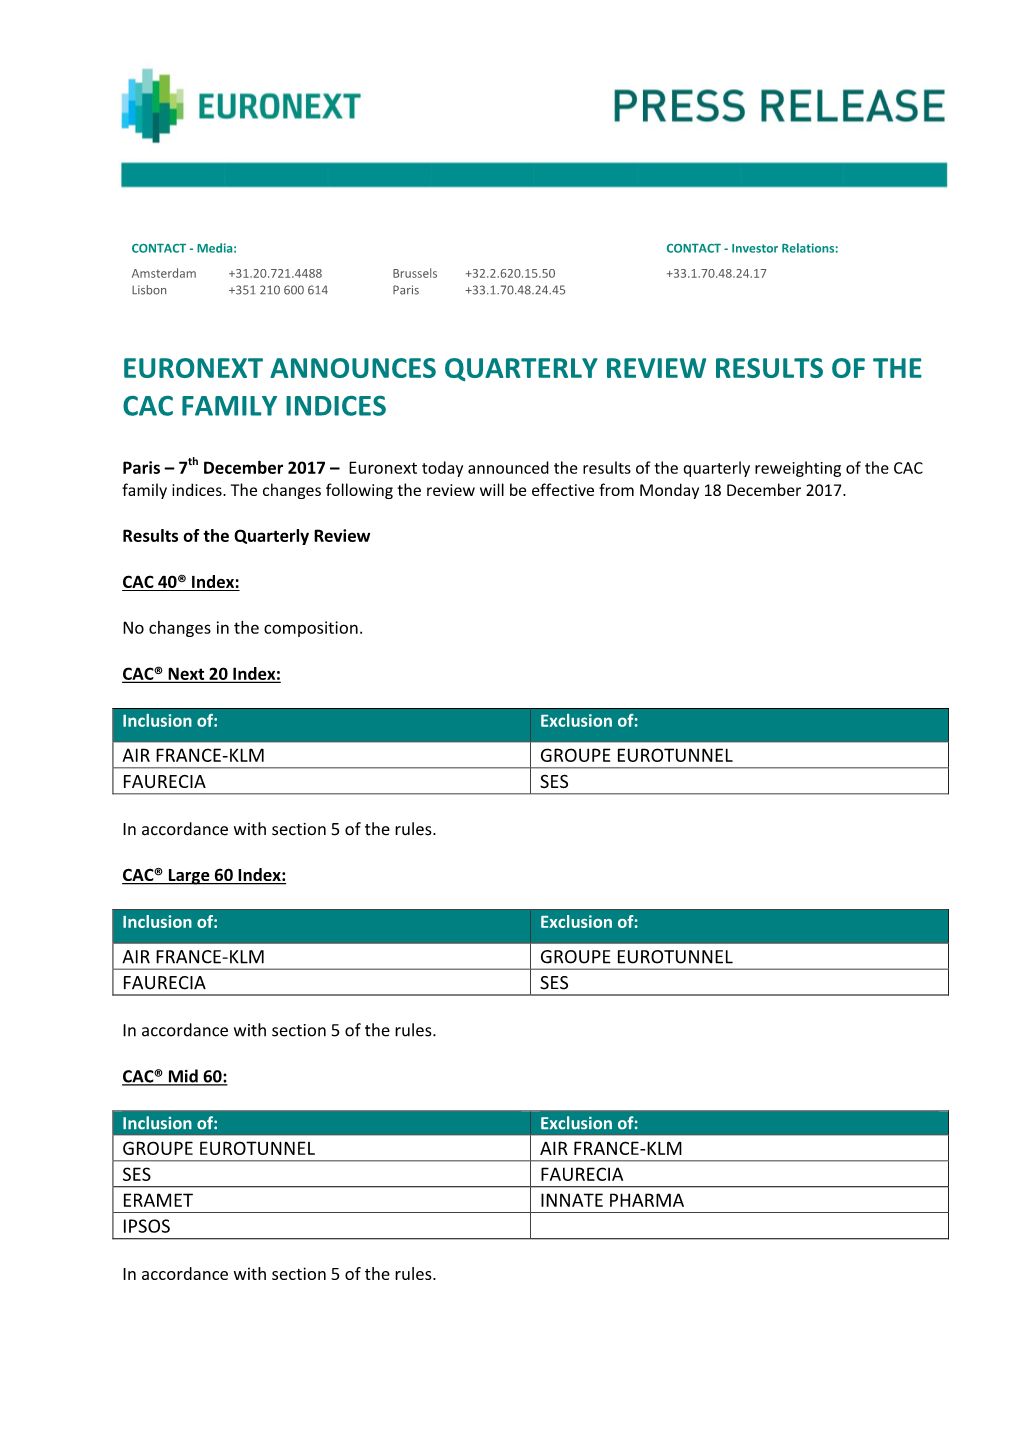 Euronext Announces Quarterly Review Results of the Cac Family Indices